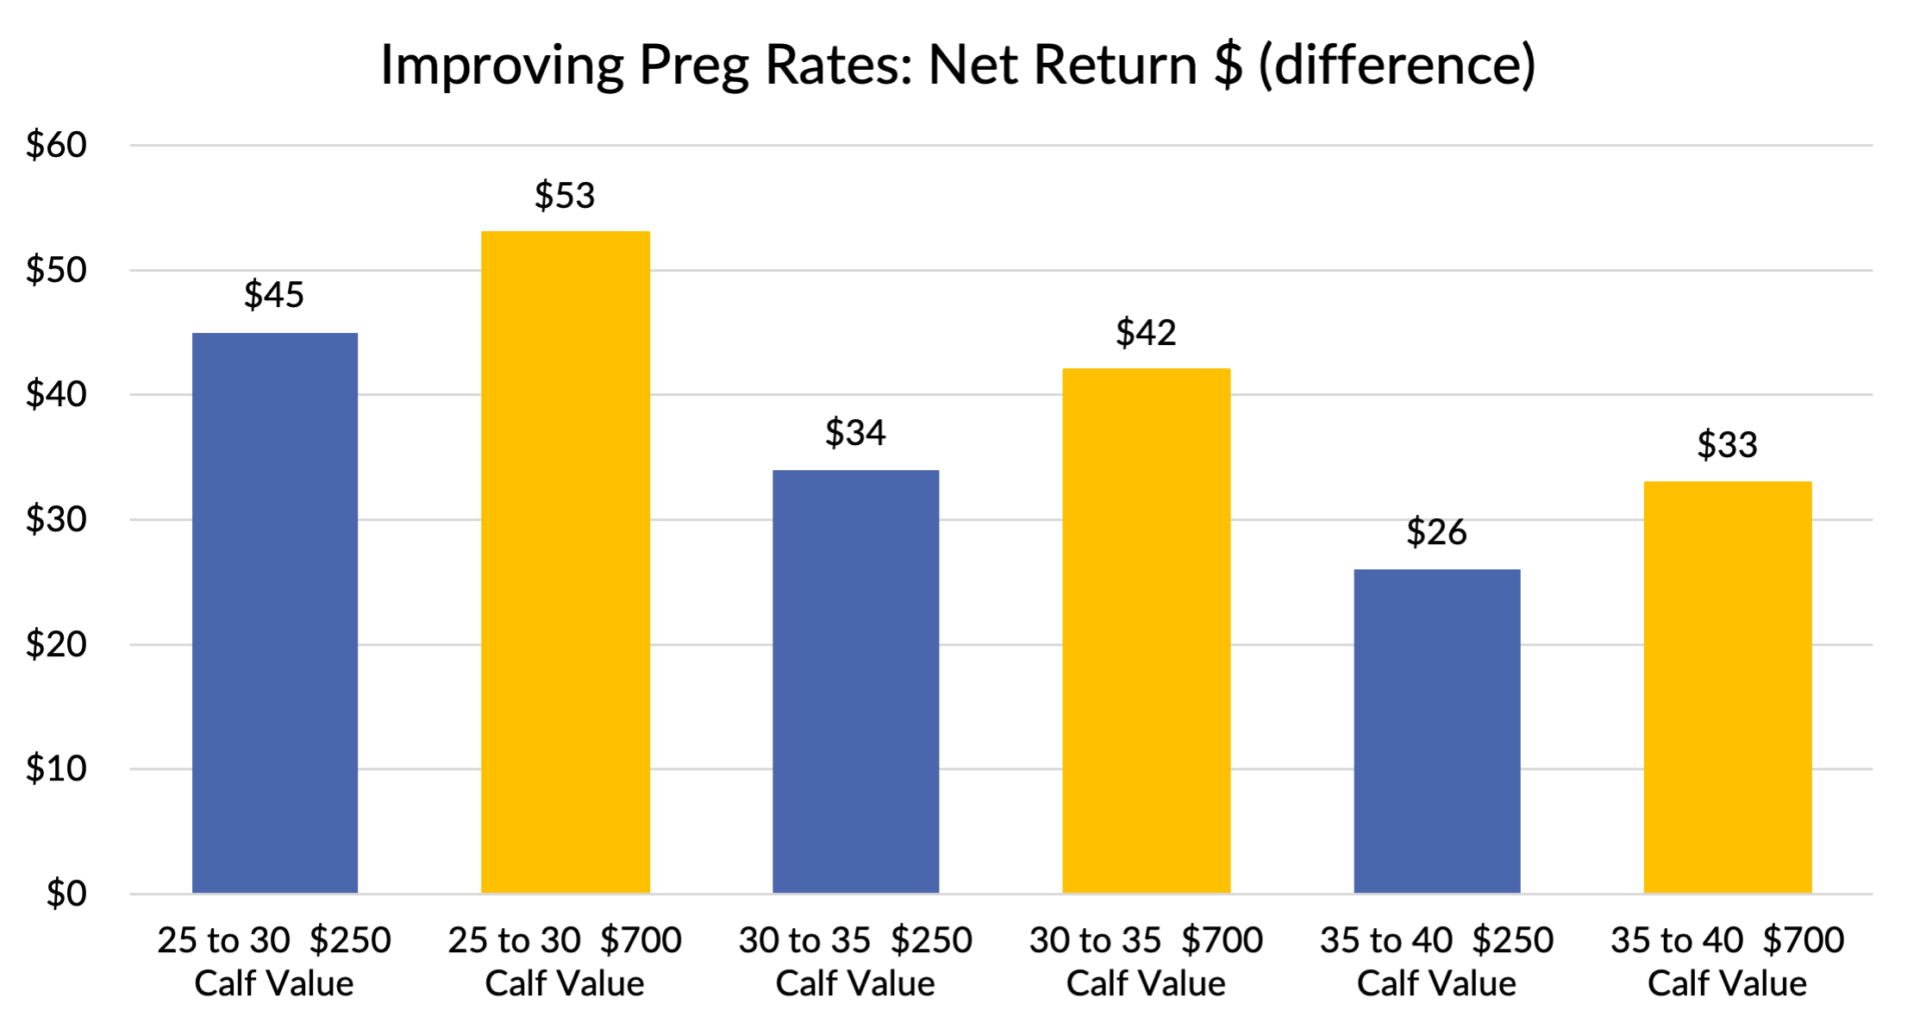 Figure 2: Net Return for Improving Preg Rate with Varying Calf Values